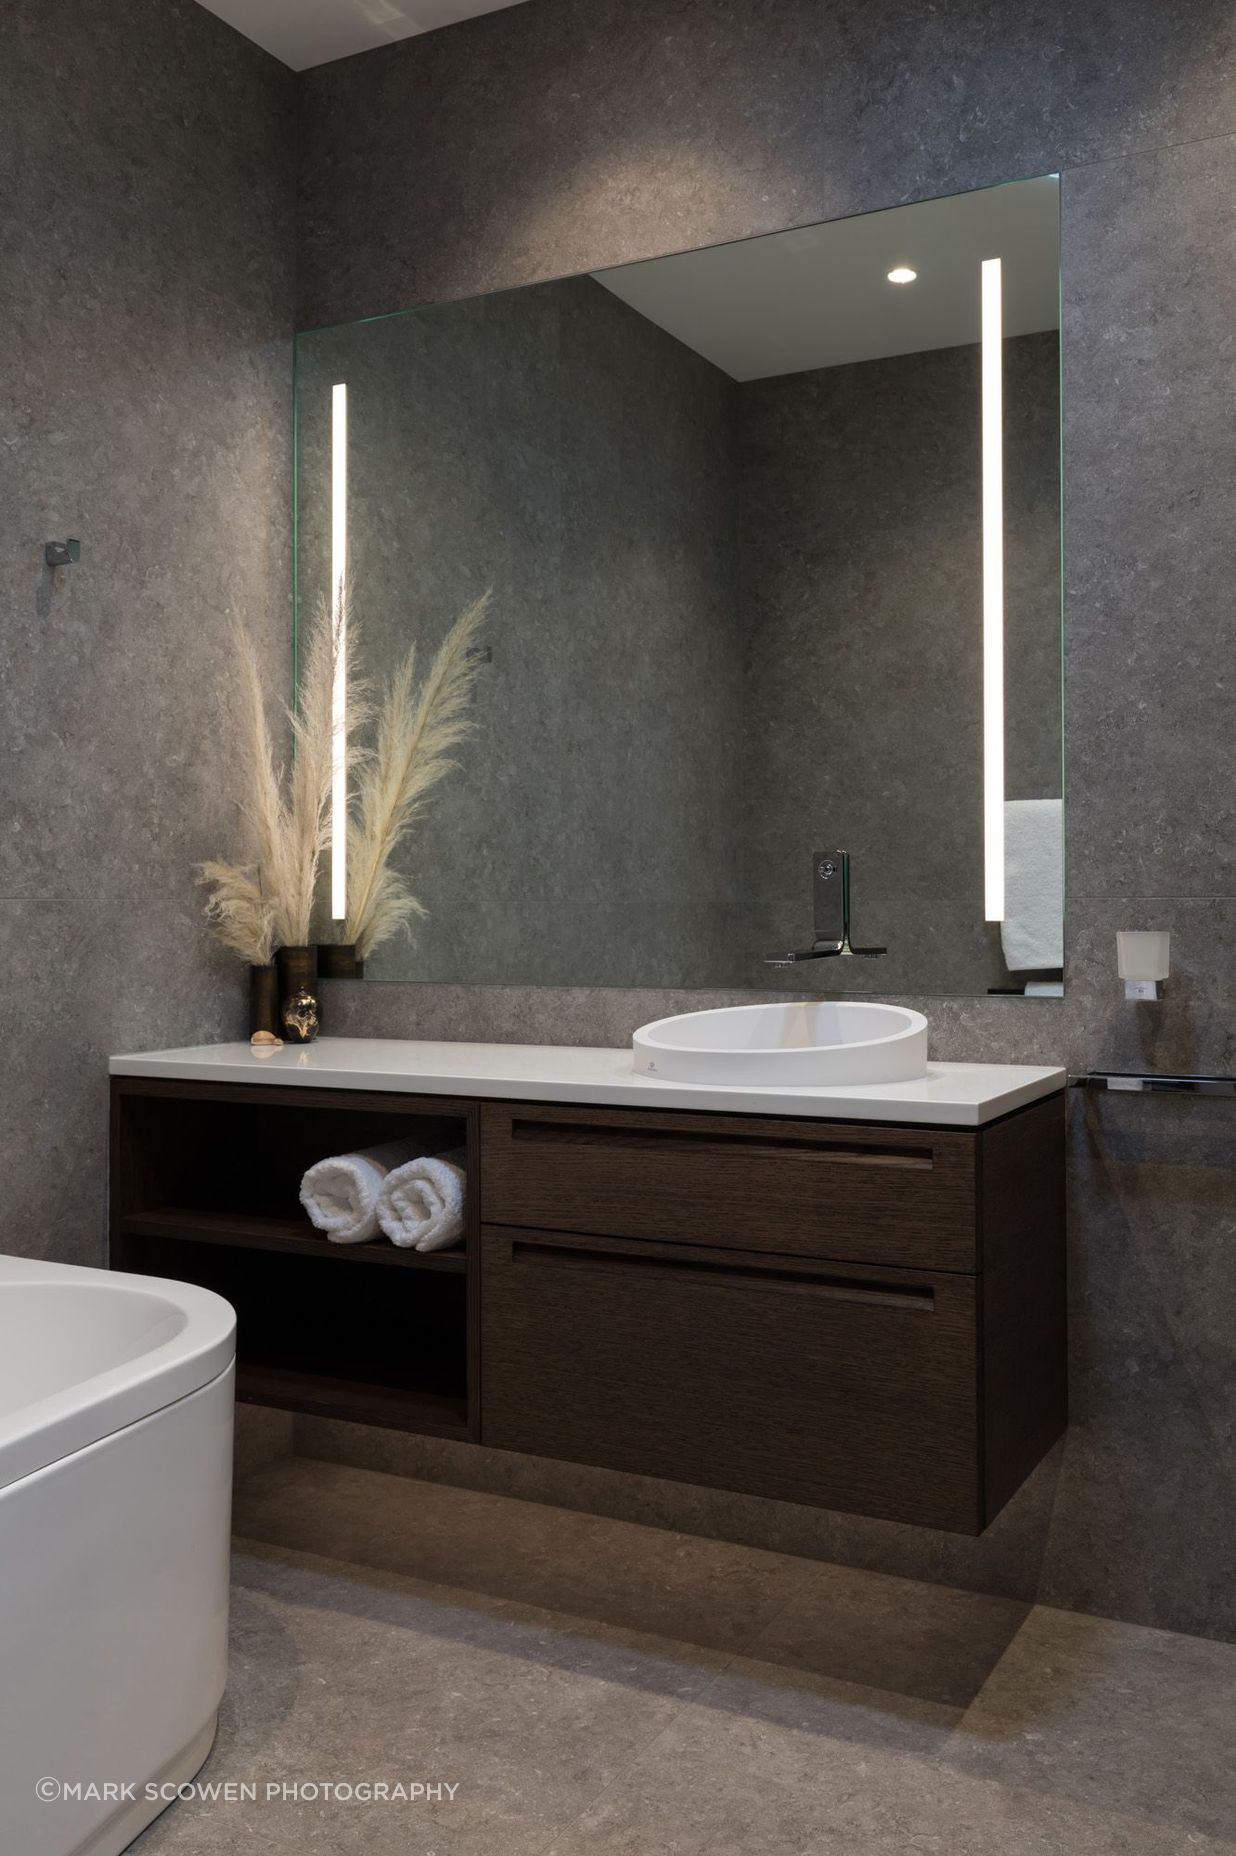 Natural tones fill this bathroom accented by built-in LED strip lights.